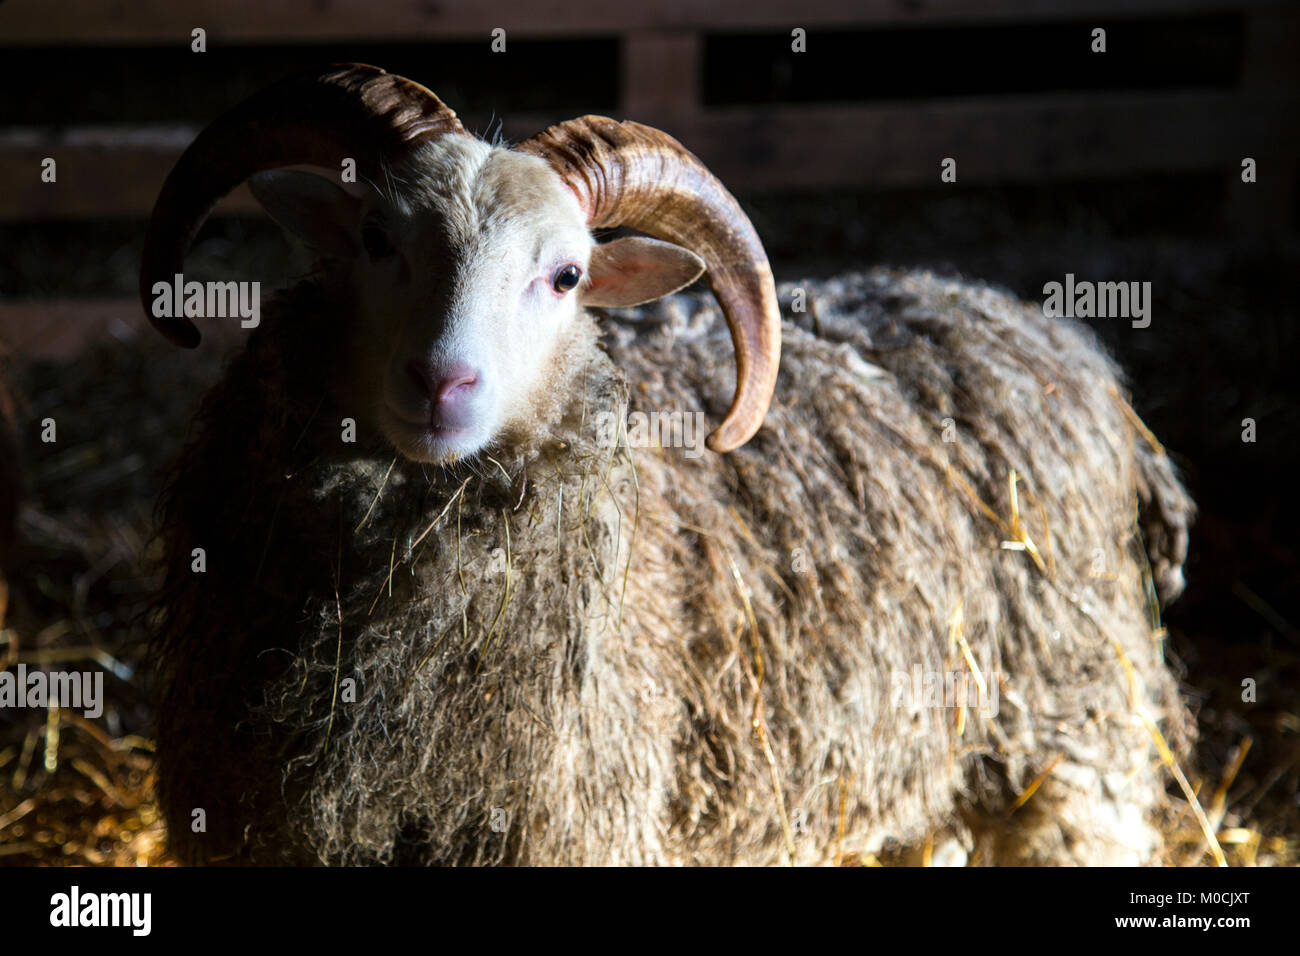 Dramatic shot of a sheep with horns inside a barn with hay in the background Stock Photo